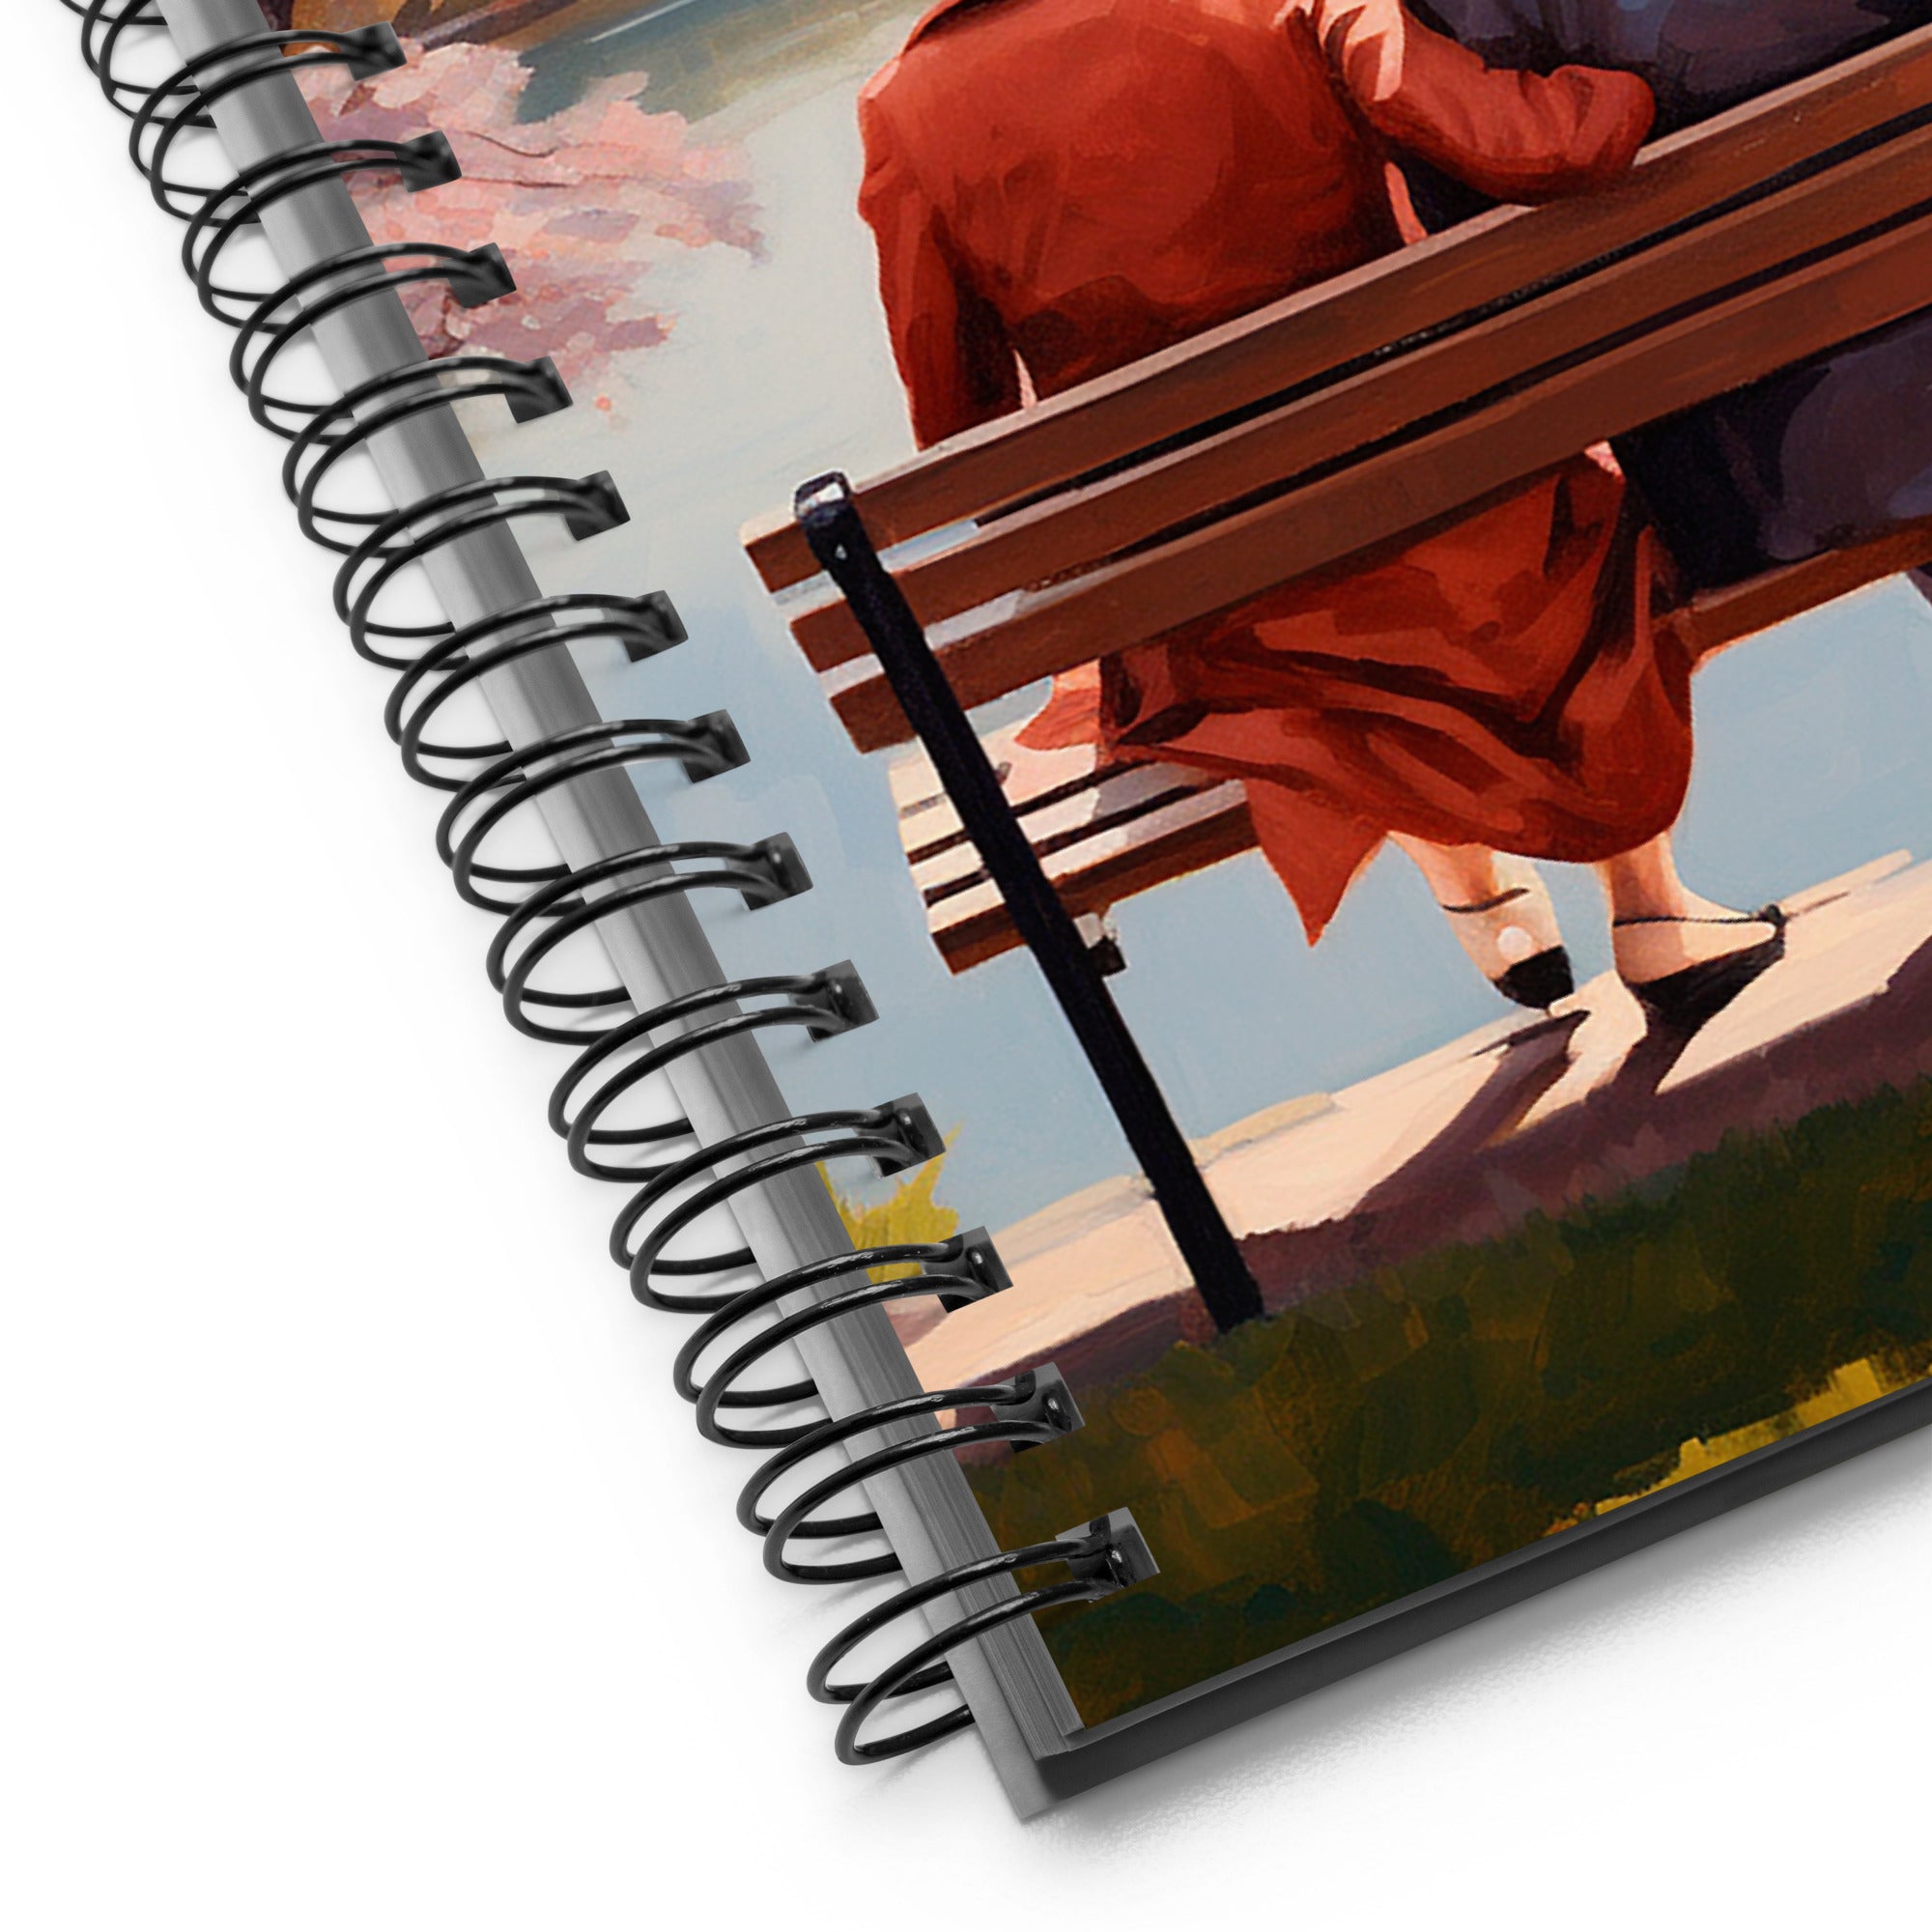 Spiral Notebook - By the Lake | Drese Art